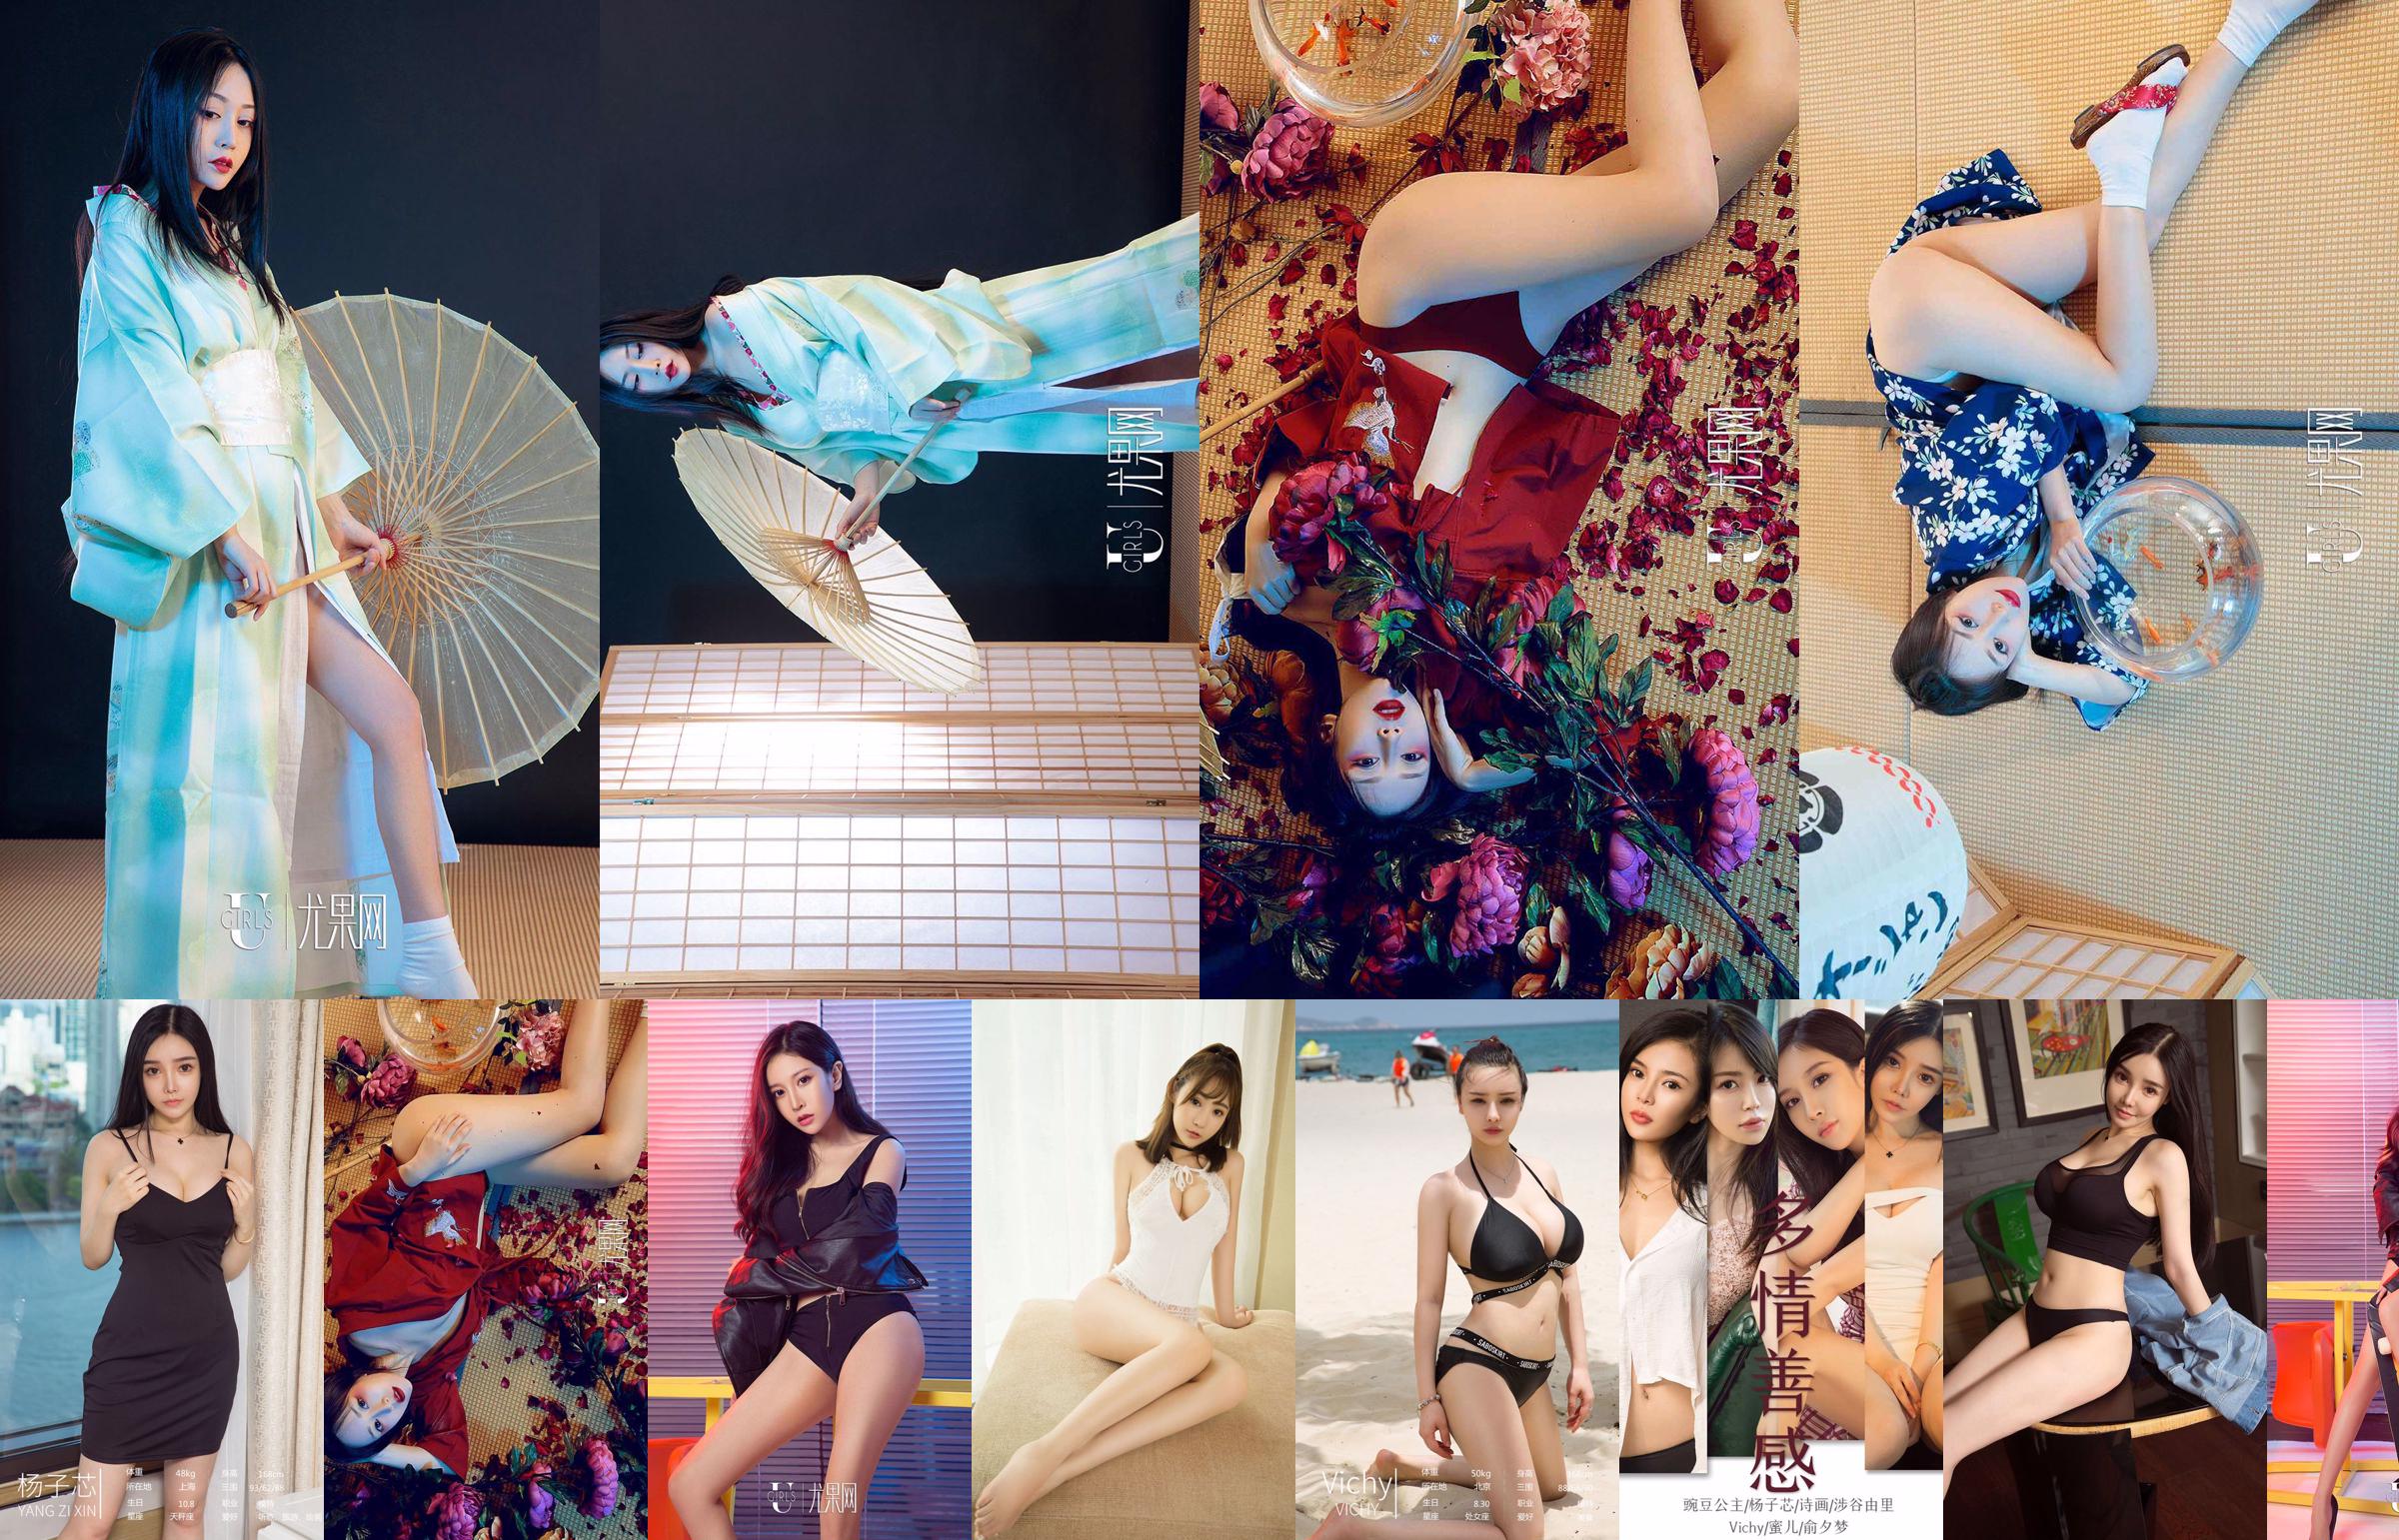 September Collection "Sentimentality and Kindness" [Youguo Circle Love Stunner] No.1590 No.53b09e Page 1